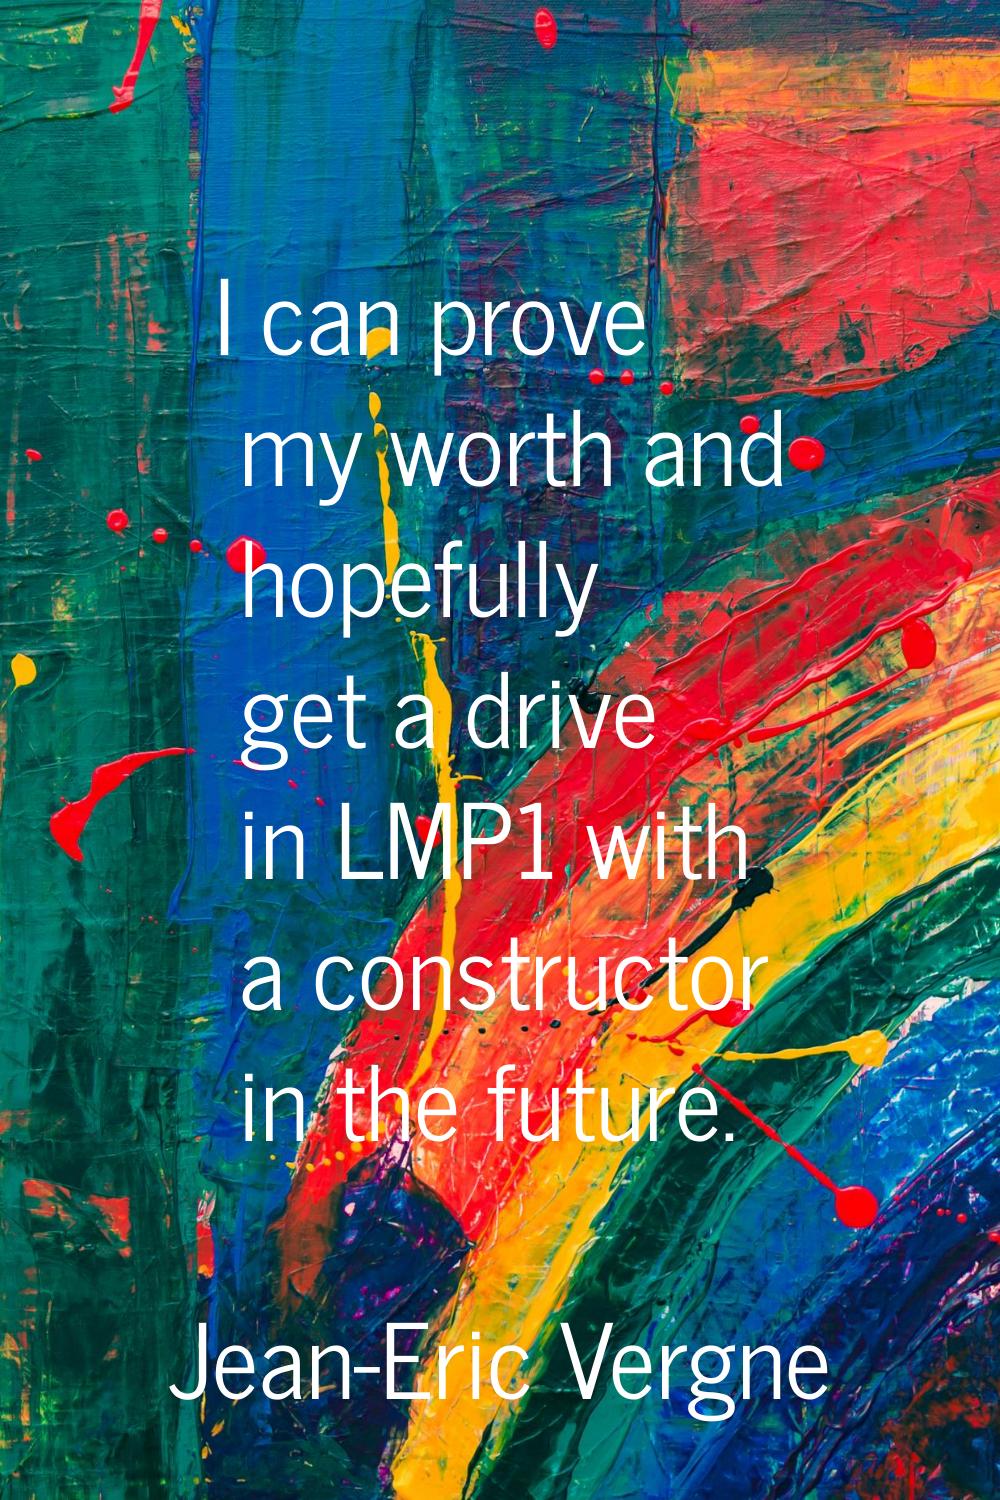 I can prove my worth and hopefully get a drive in LMP1 with a constructor in the future.